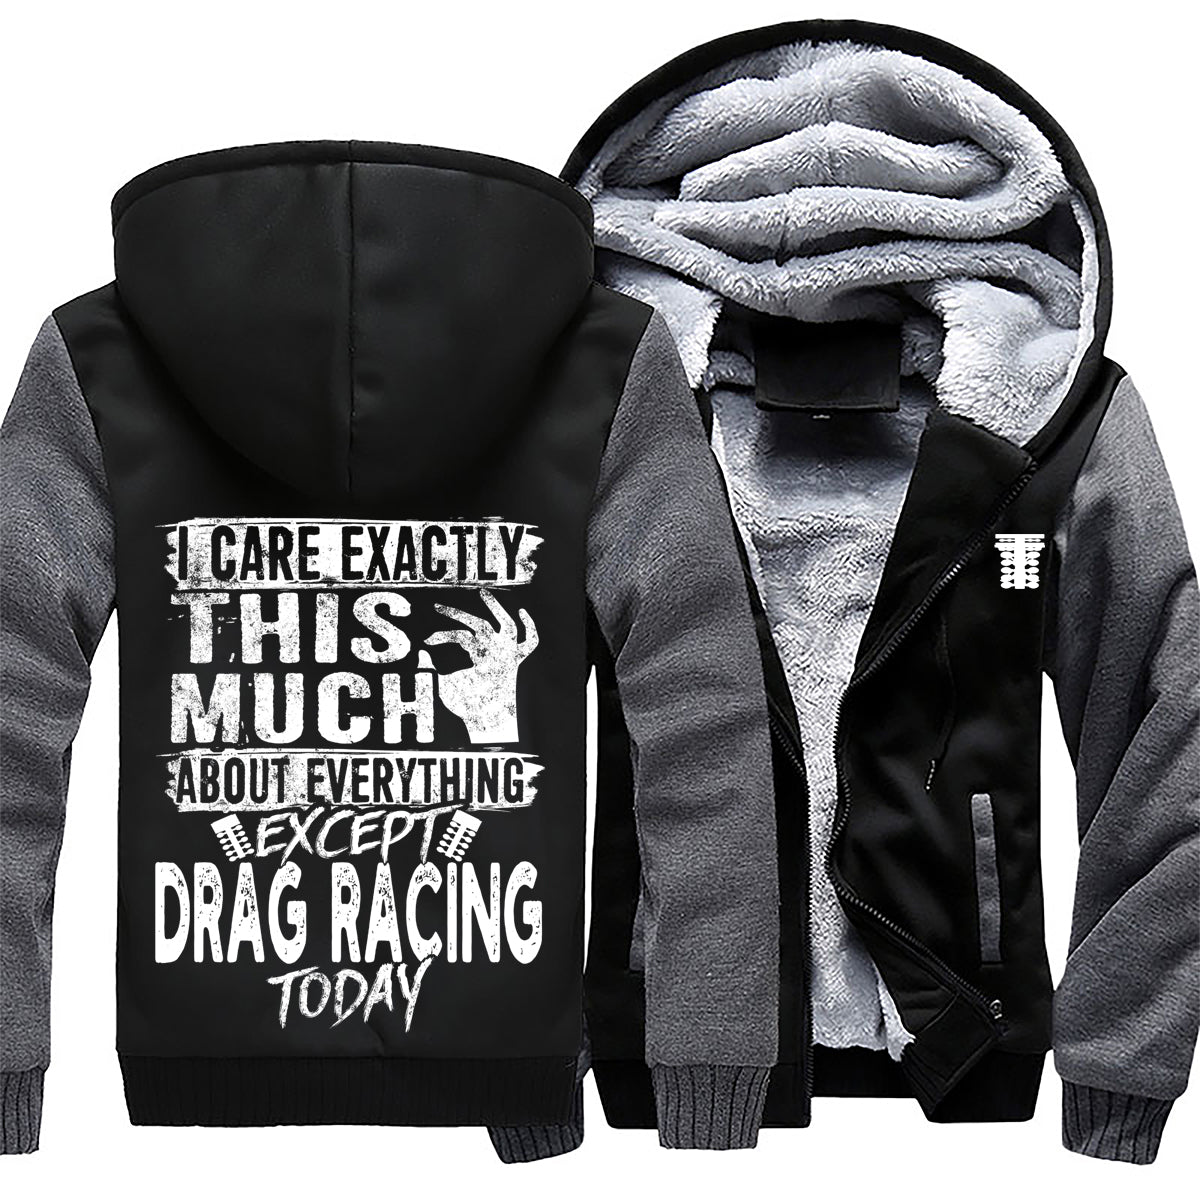 I Care Exactly This Much About Anything Except Drag Racing Today Jacket